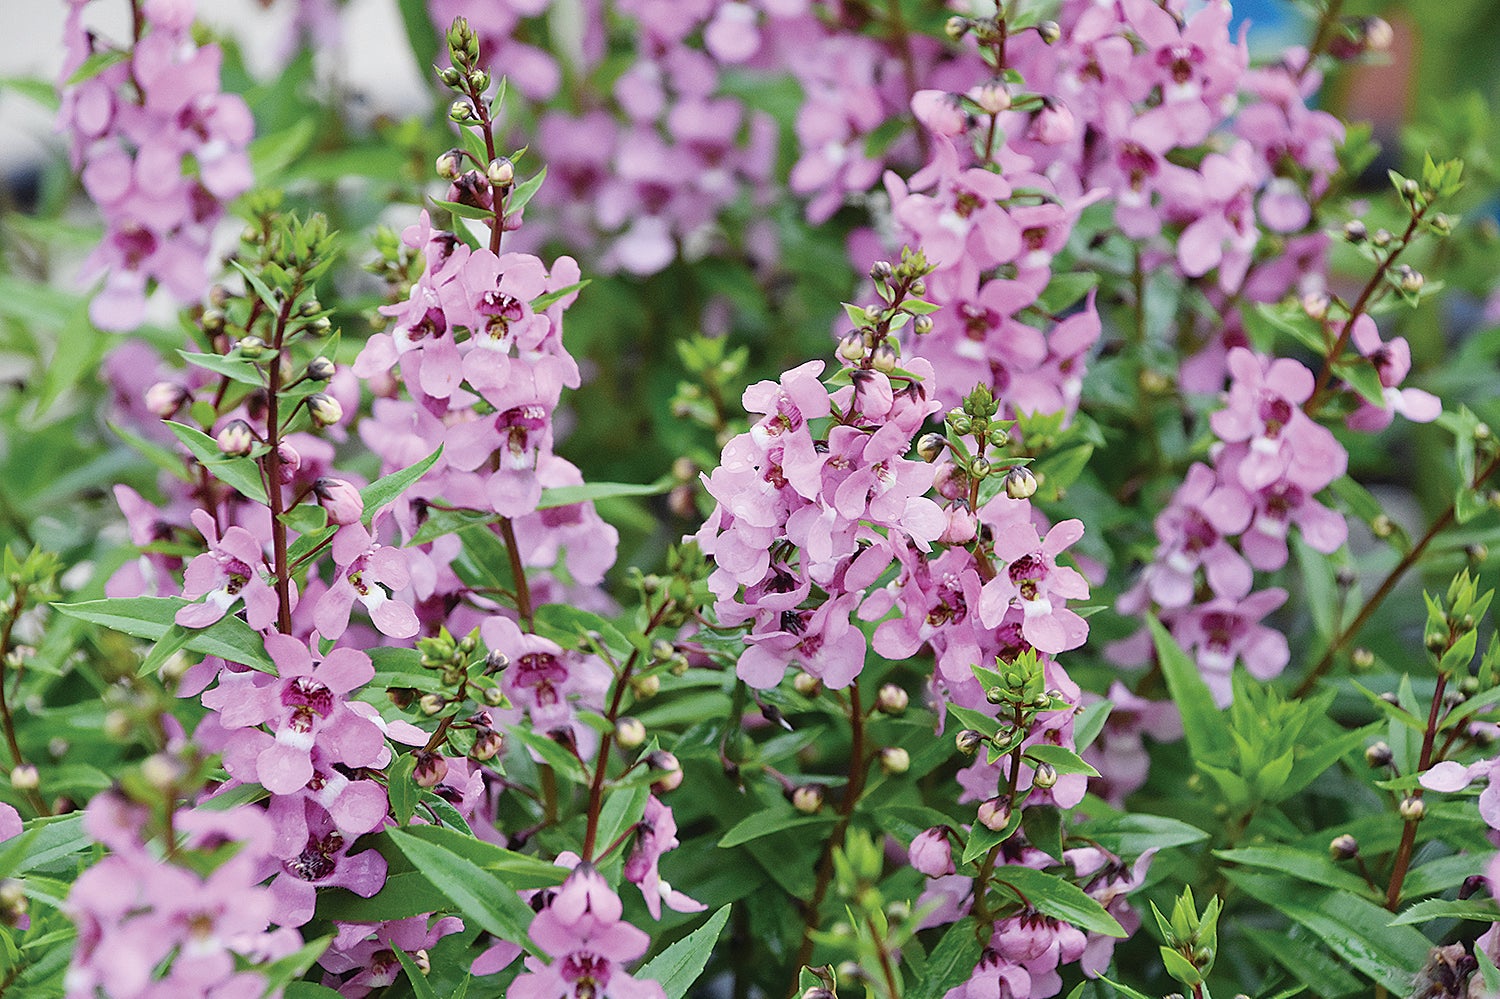 Angelonia thrives in full sun, Mississippi humidity - The Oxford Eagle ...